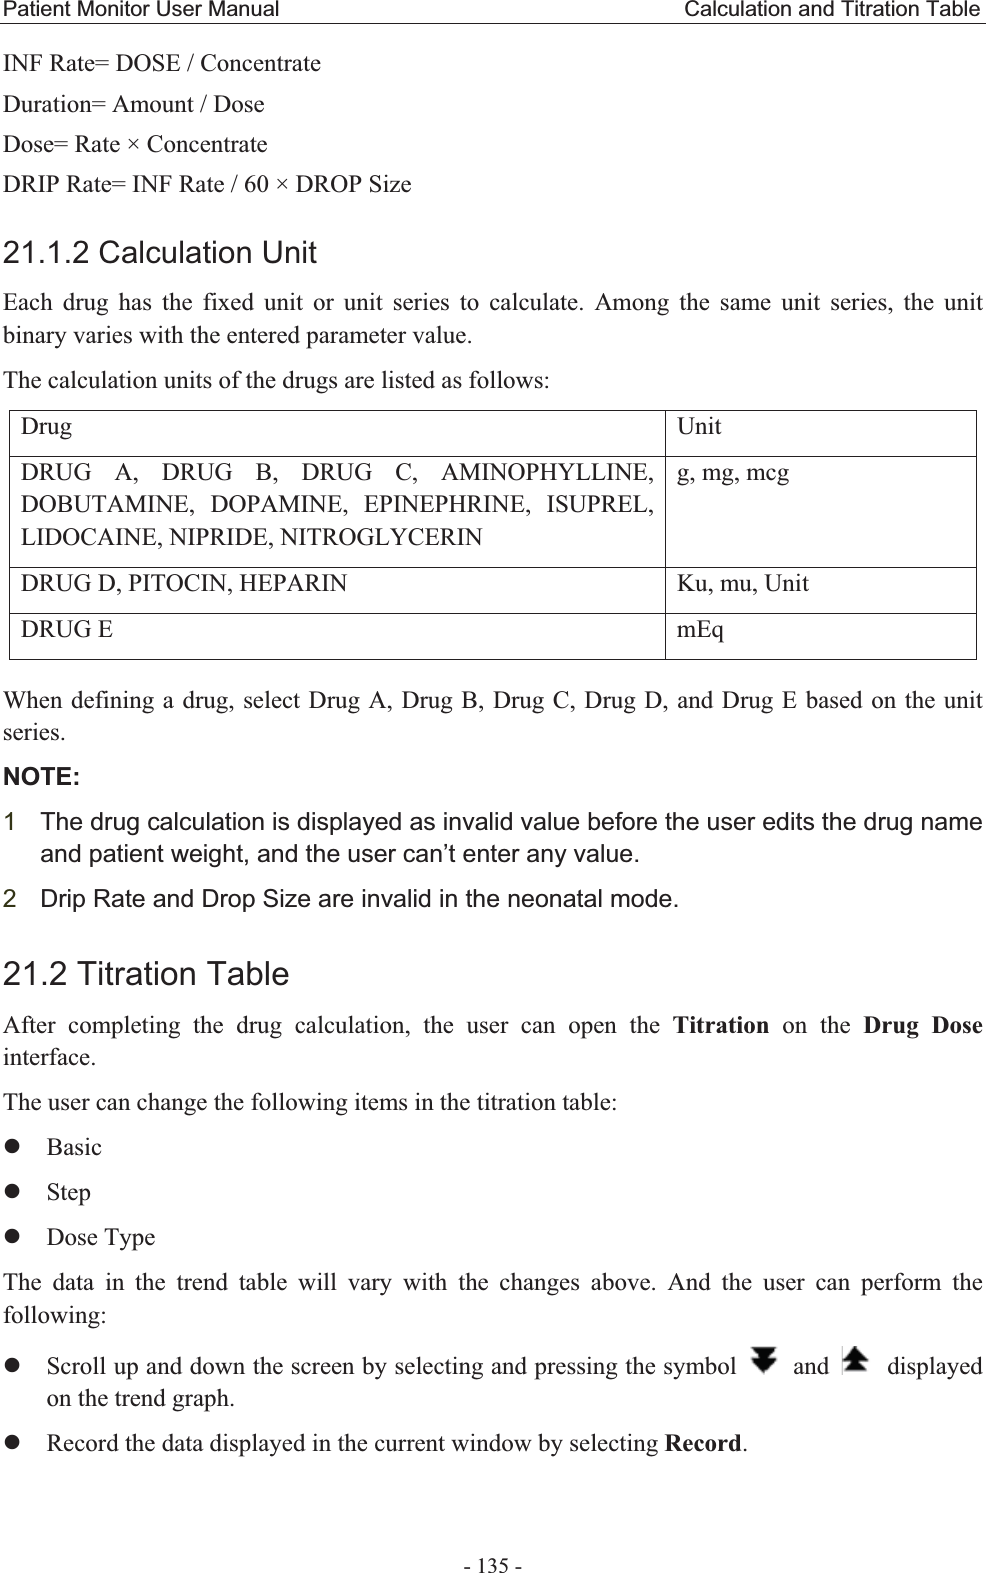 Patient Monitor User Manual                                     Calculation and Titration Table  - 135 - INF Rate= DOSE / Concentrate Duration= Amount / Dose Dose= Rate × Concentrate DRIP Rate= INF Rate / 60 × DROP Size 21.1.2 Calculation Unit Each drug has the fixed unit or unit series to calculate. Among the same unit series, the unit binary varies with the entered parameter value. The calculation units of the drugs are listed as follows: Drug   Unit  DRUG A, DRUG B, DRUG C, AMINOPHYLLINE, DOBUTAMINE, DOPAMINE, EPINEPHRINE, ISUPREL, LIDOCAINE, NIPRIDE, NITROGLYCERIN   g, mg, mcg DRUG D, PITOCIN, HEPARIN  Ku, mu, Unit DRUG E  mEq When defining a drug, select Drug A, Drug B, Drug C, Drug D, and Drug E based on the unit series.   NOTE:1The drug calculation is displayed as invalid value before the user edits the drug name and patient weight, and the user can’t enter any value. 2Drip Rate and Drop Size are invalid in the neonatal mode. 21.2 Titration Table After completing the drug calculation, the user can open the Titration on the Drug Dose interface. The user can change the following items in the titration table: zBasic zStep zDose Type The data in the trend table will vary with the changes above. And the user can perform the following: zScroll up and down the screen by selecting and pressing the symbol   and   displayed on the trend graph. zRecord the data displayed in the current window by selecting Record. 